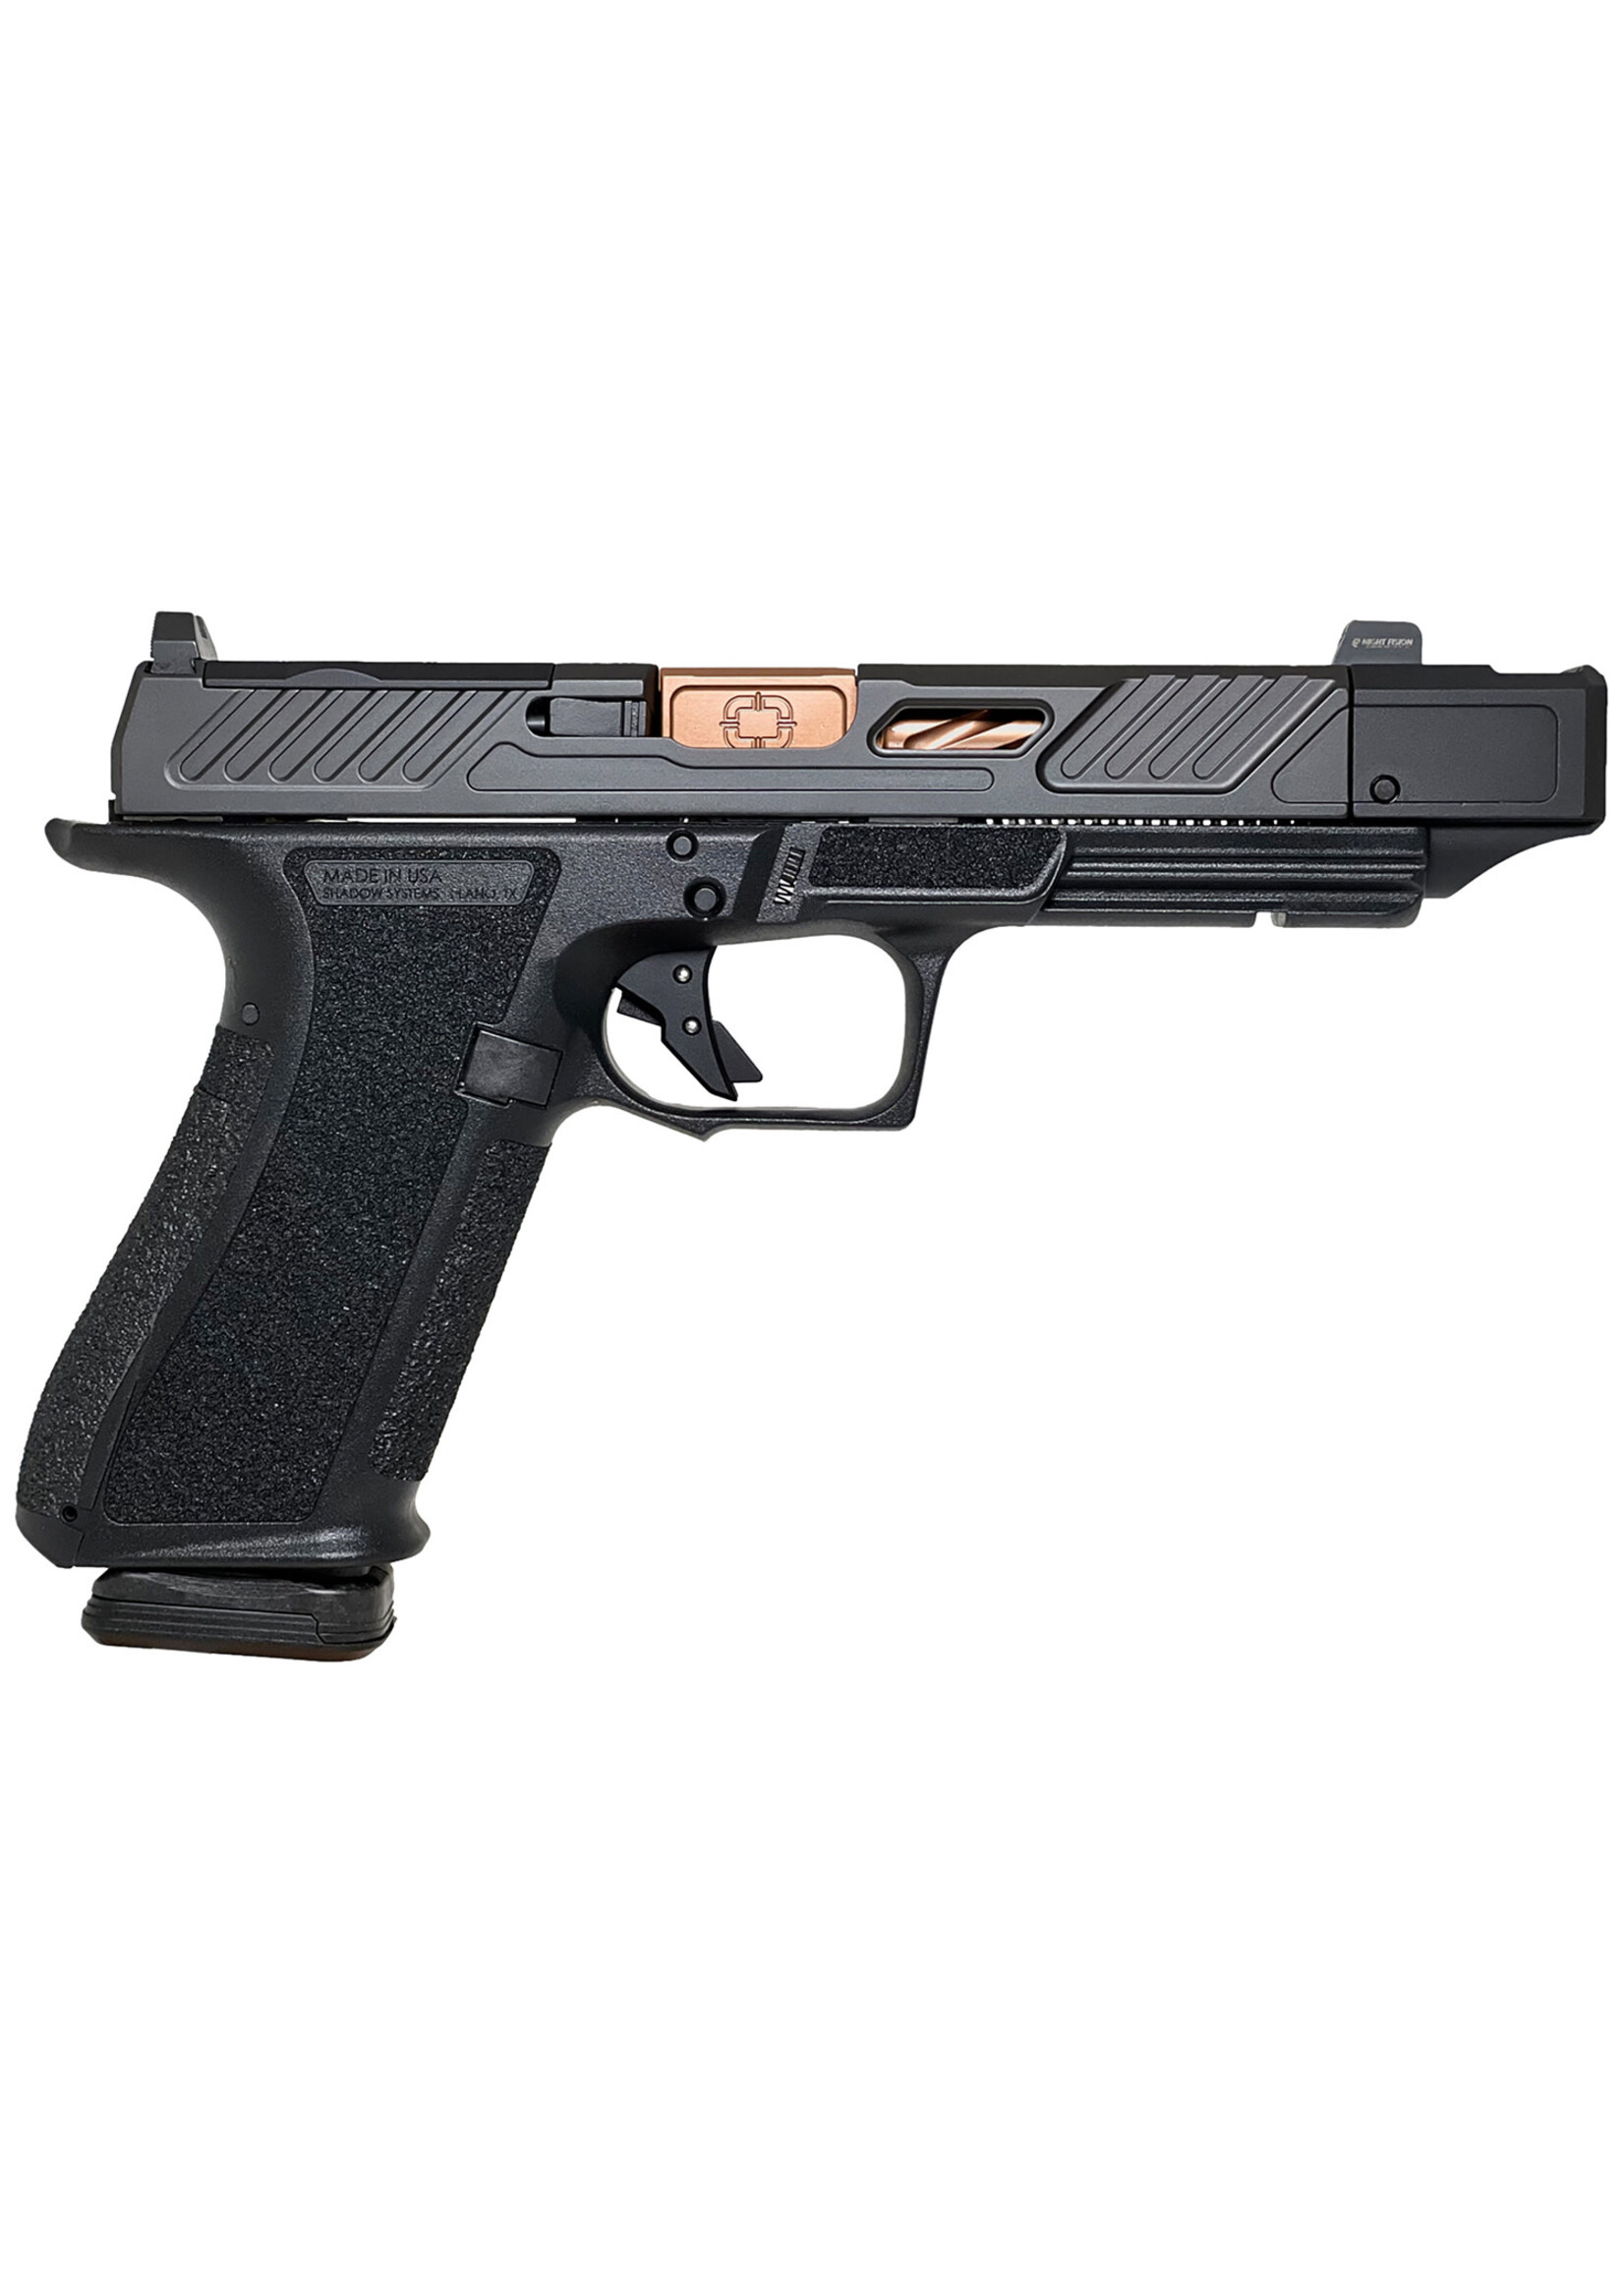 Shadow Systems Shadow Systems SS2211 DR920P Compensator Full Size 9mm Luger 17+1, 4.60" Bronze TICN Match Grade/Spiral Fluted/Compensated Barrel & Optic Cut/Serrated/Window Cut Stainless Steel Slide, Black Polymer Frame w/Beavertail & Picatinny Rail